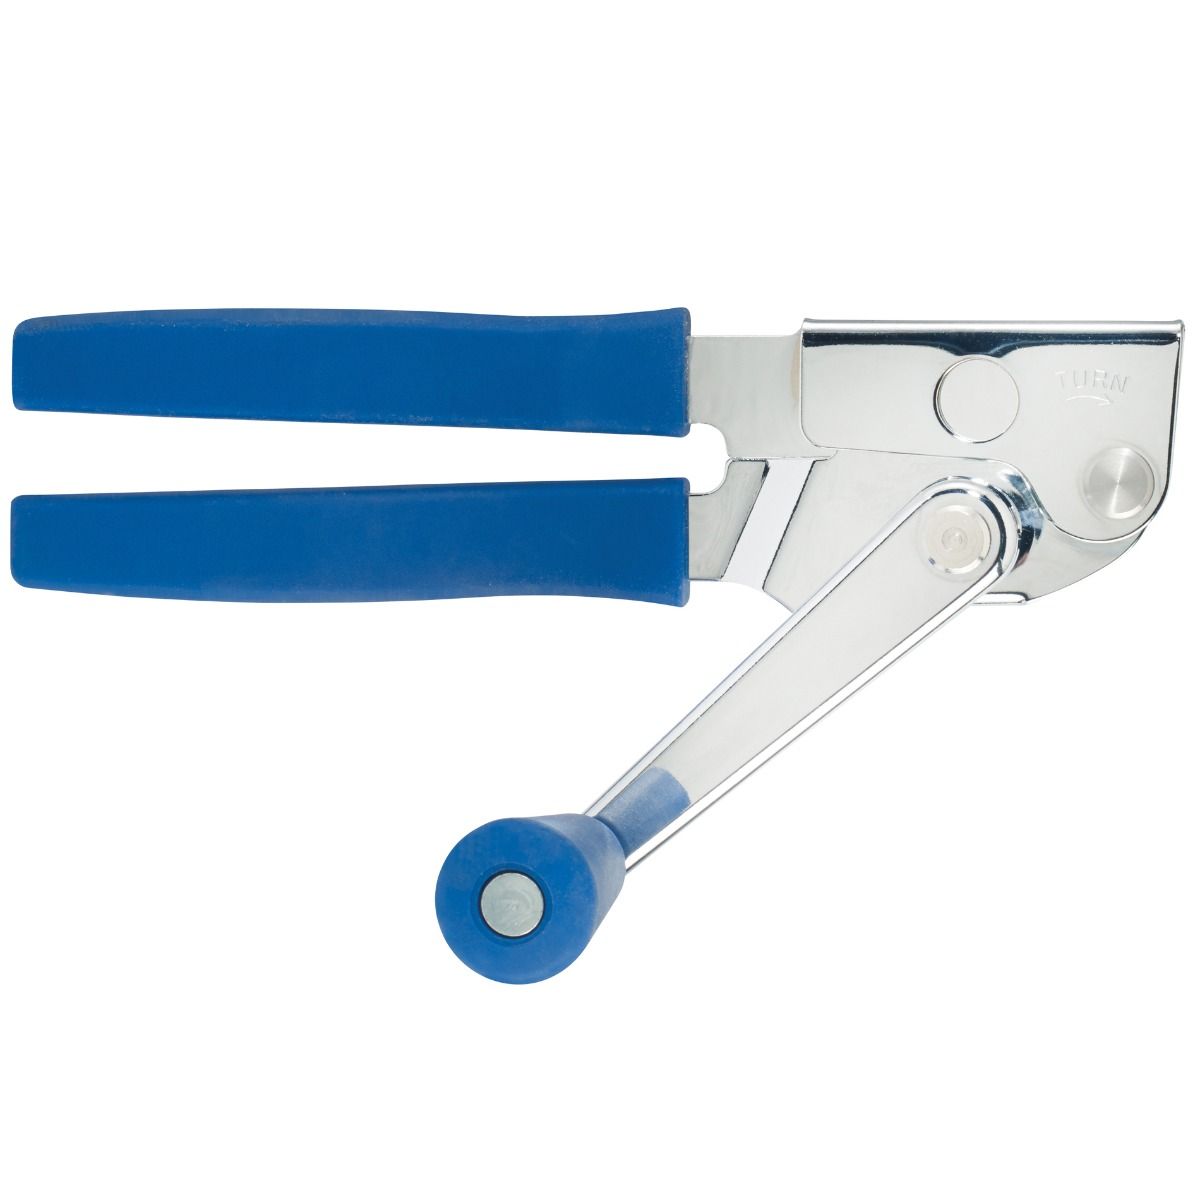 Winco CO-530, Light-Weight Portable Can Opener